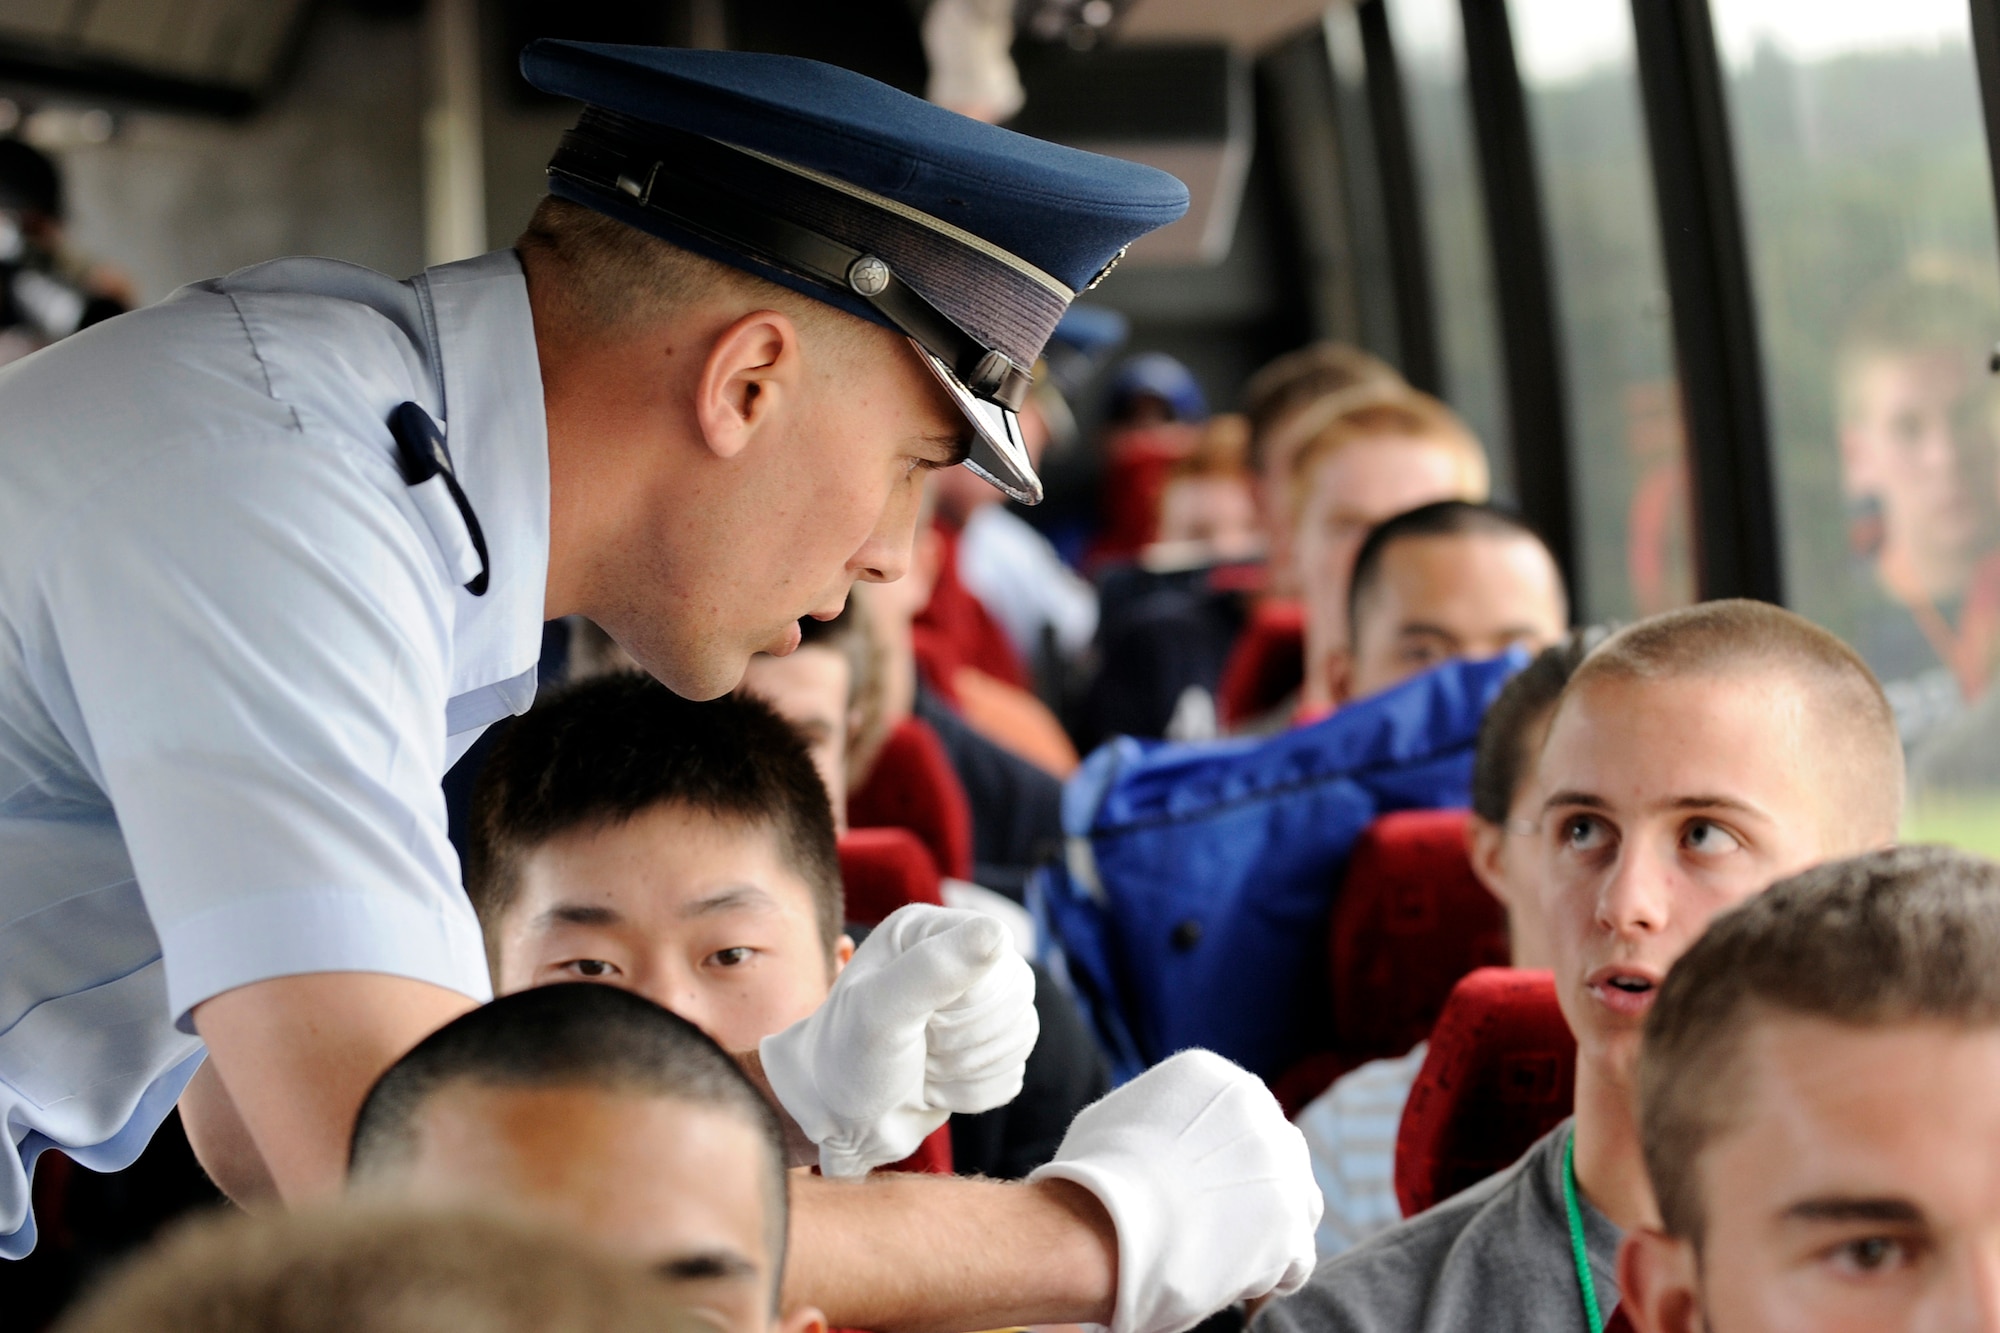 Cadet 2nd Class Nathan Rings addresses a basic cadet during a bus ride from Doolittle Hall to the Cadet Area at the U.S. Air Force Academy in Colorado Springs, Colo., June 25. Basic cadets are directed to sit with their eyes facing forward at all times while on the bus. (U.S. Air Force photo/Dave Ahlschwede)